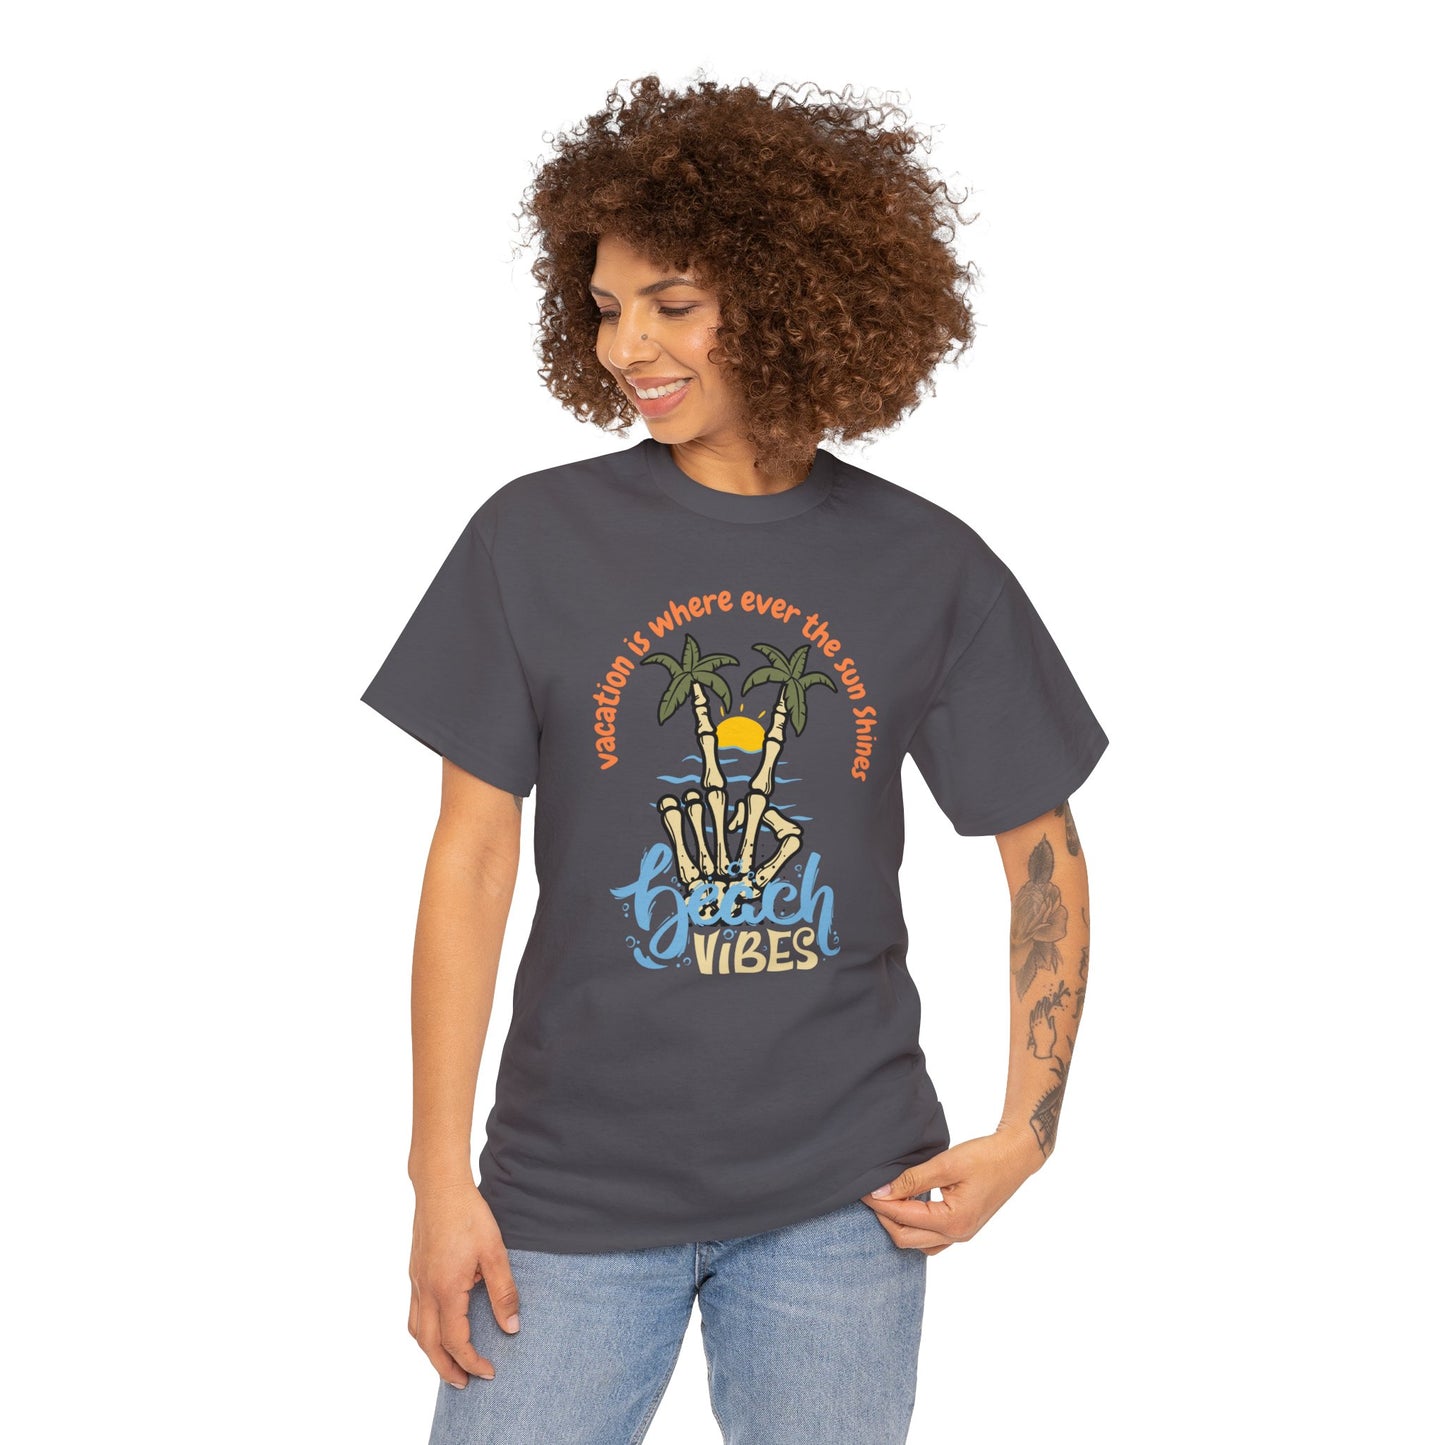 Vacation Is Where Ever The Sun Shines Unisex Heavy Cotton Tee